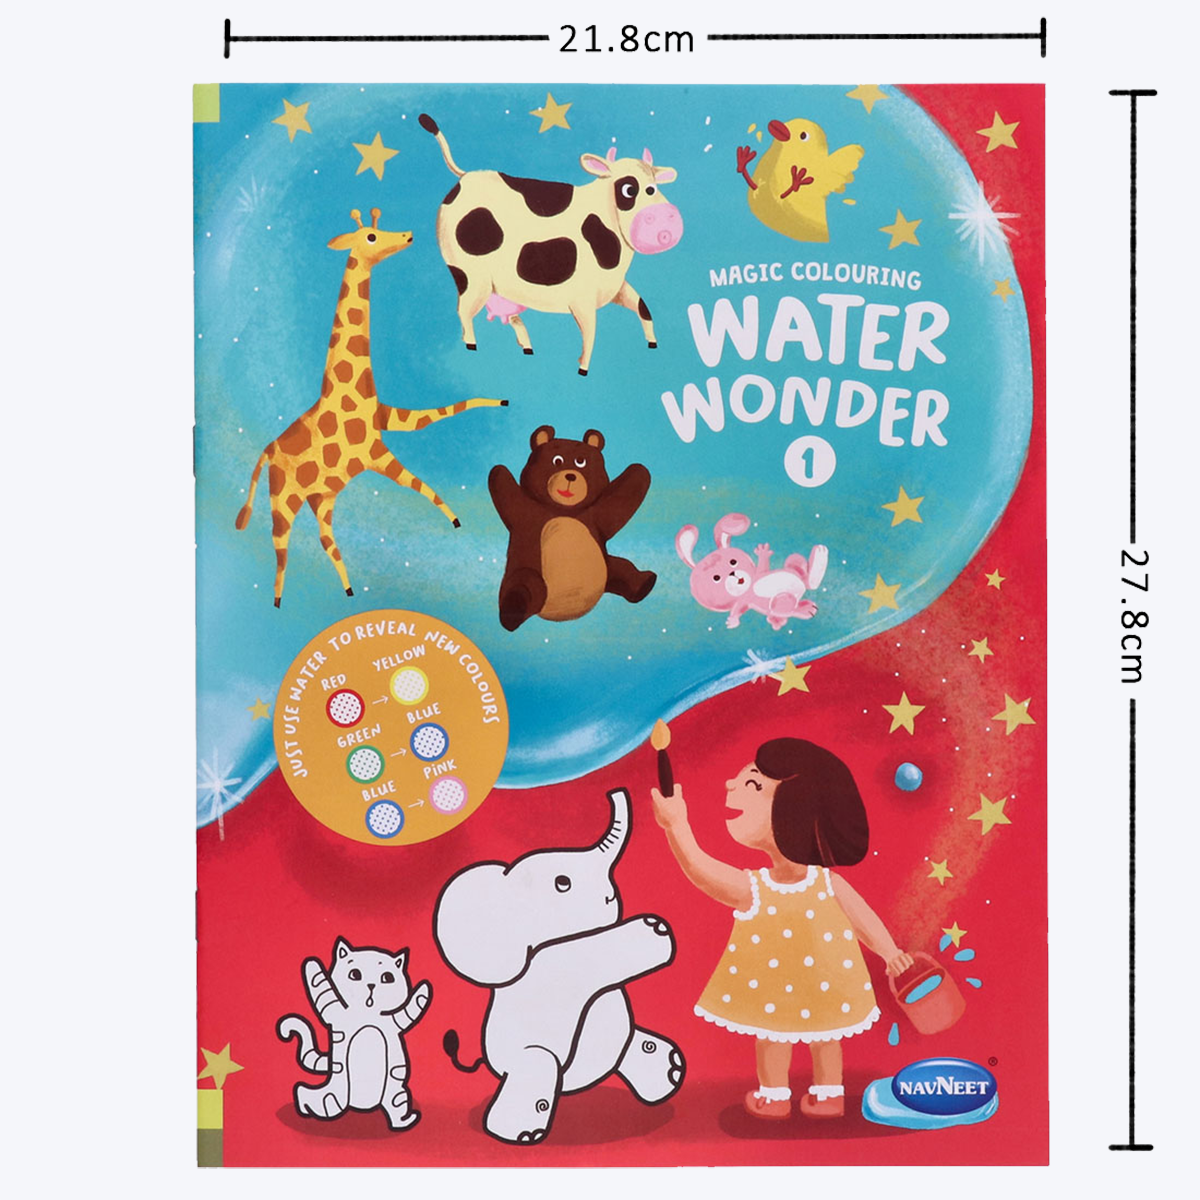 Navneet Water Wonder colouring books I and II, child friendly with various pictures.